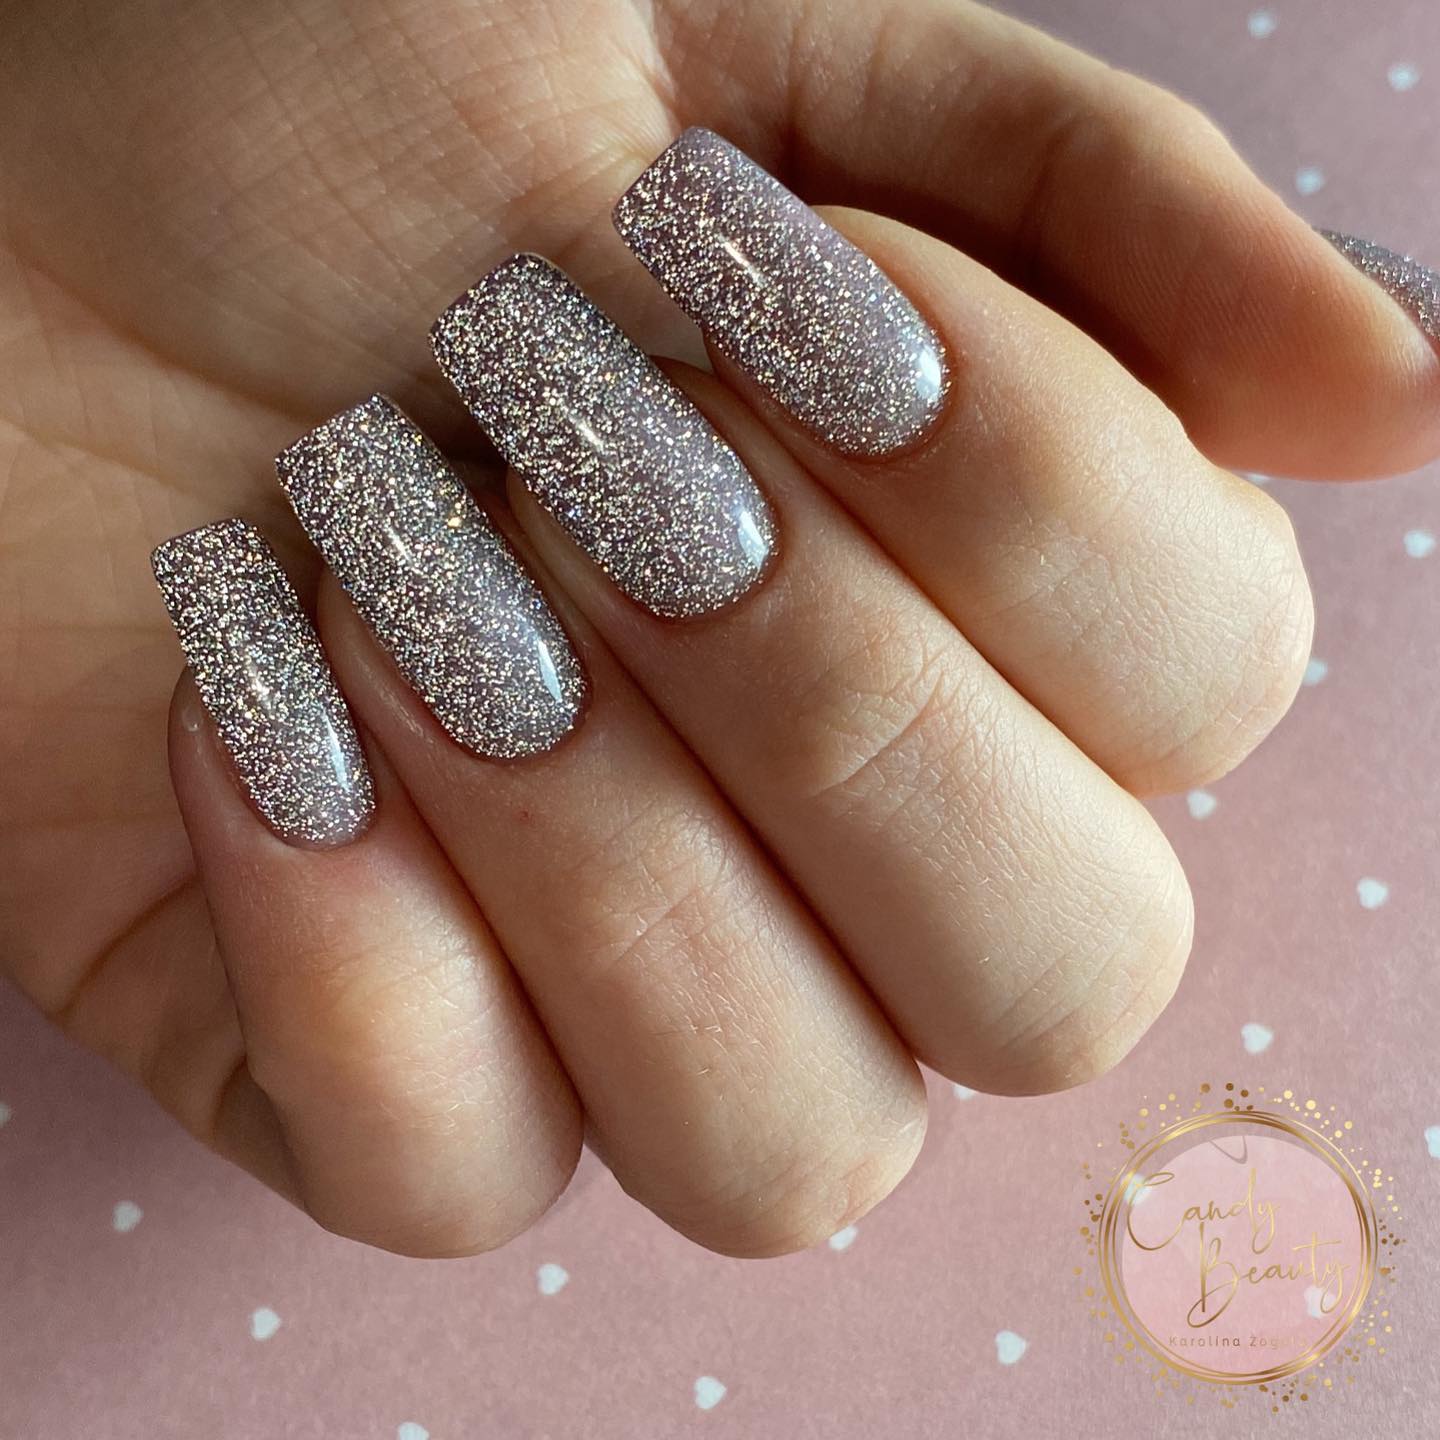 49 Cute Nail Art Design Ideas With Pretty & Creative Details : Silver leaf  on pink nude nails